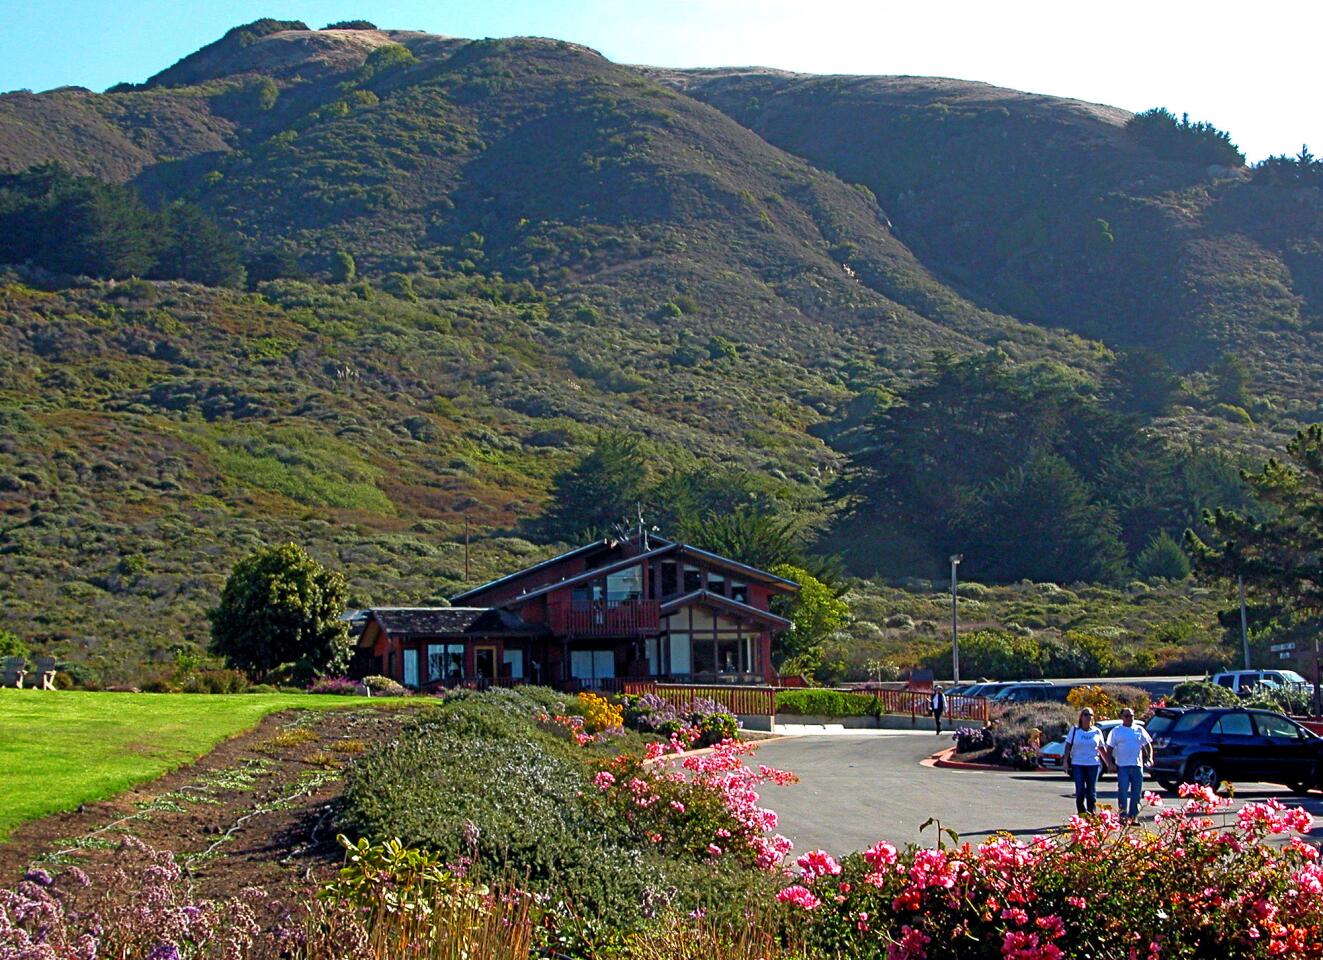 The 17-acre Ragged Point Inn & Resort sits at the south end of the Big Sur coast, about an hour's drive from San Luis Obispo. Founded in the late 1950s by Wiley and Mildred Ramey, the inn began as a two-room motel on a lonely stretch of highway.